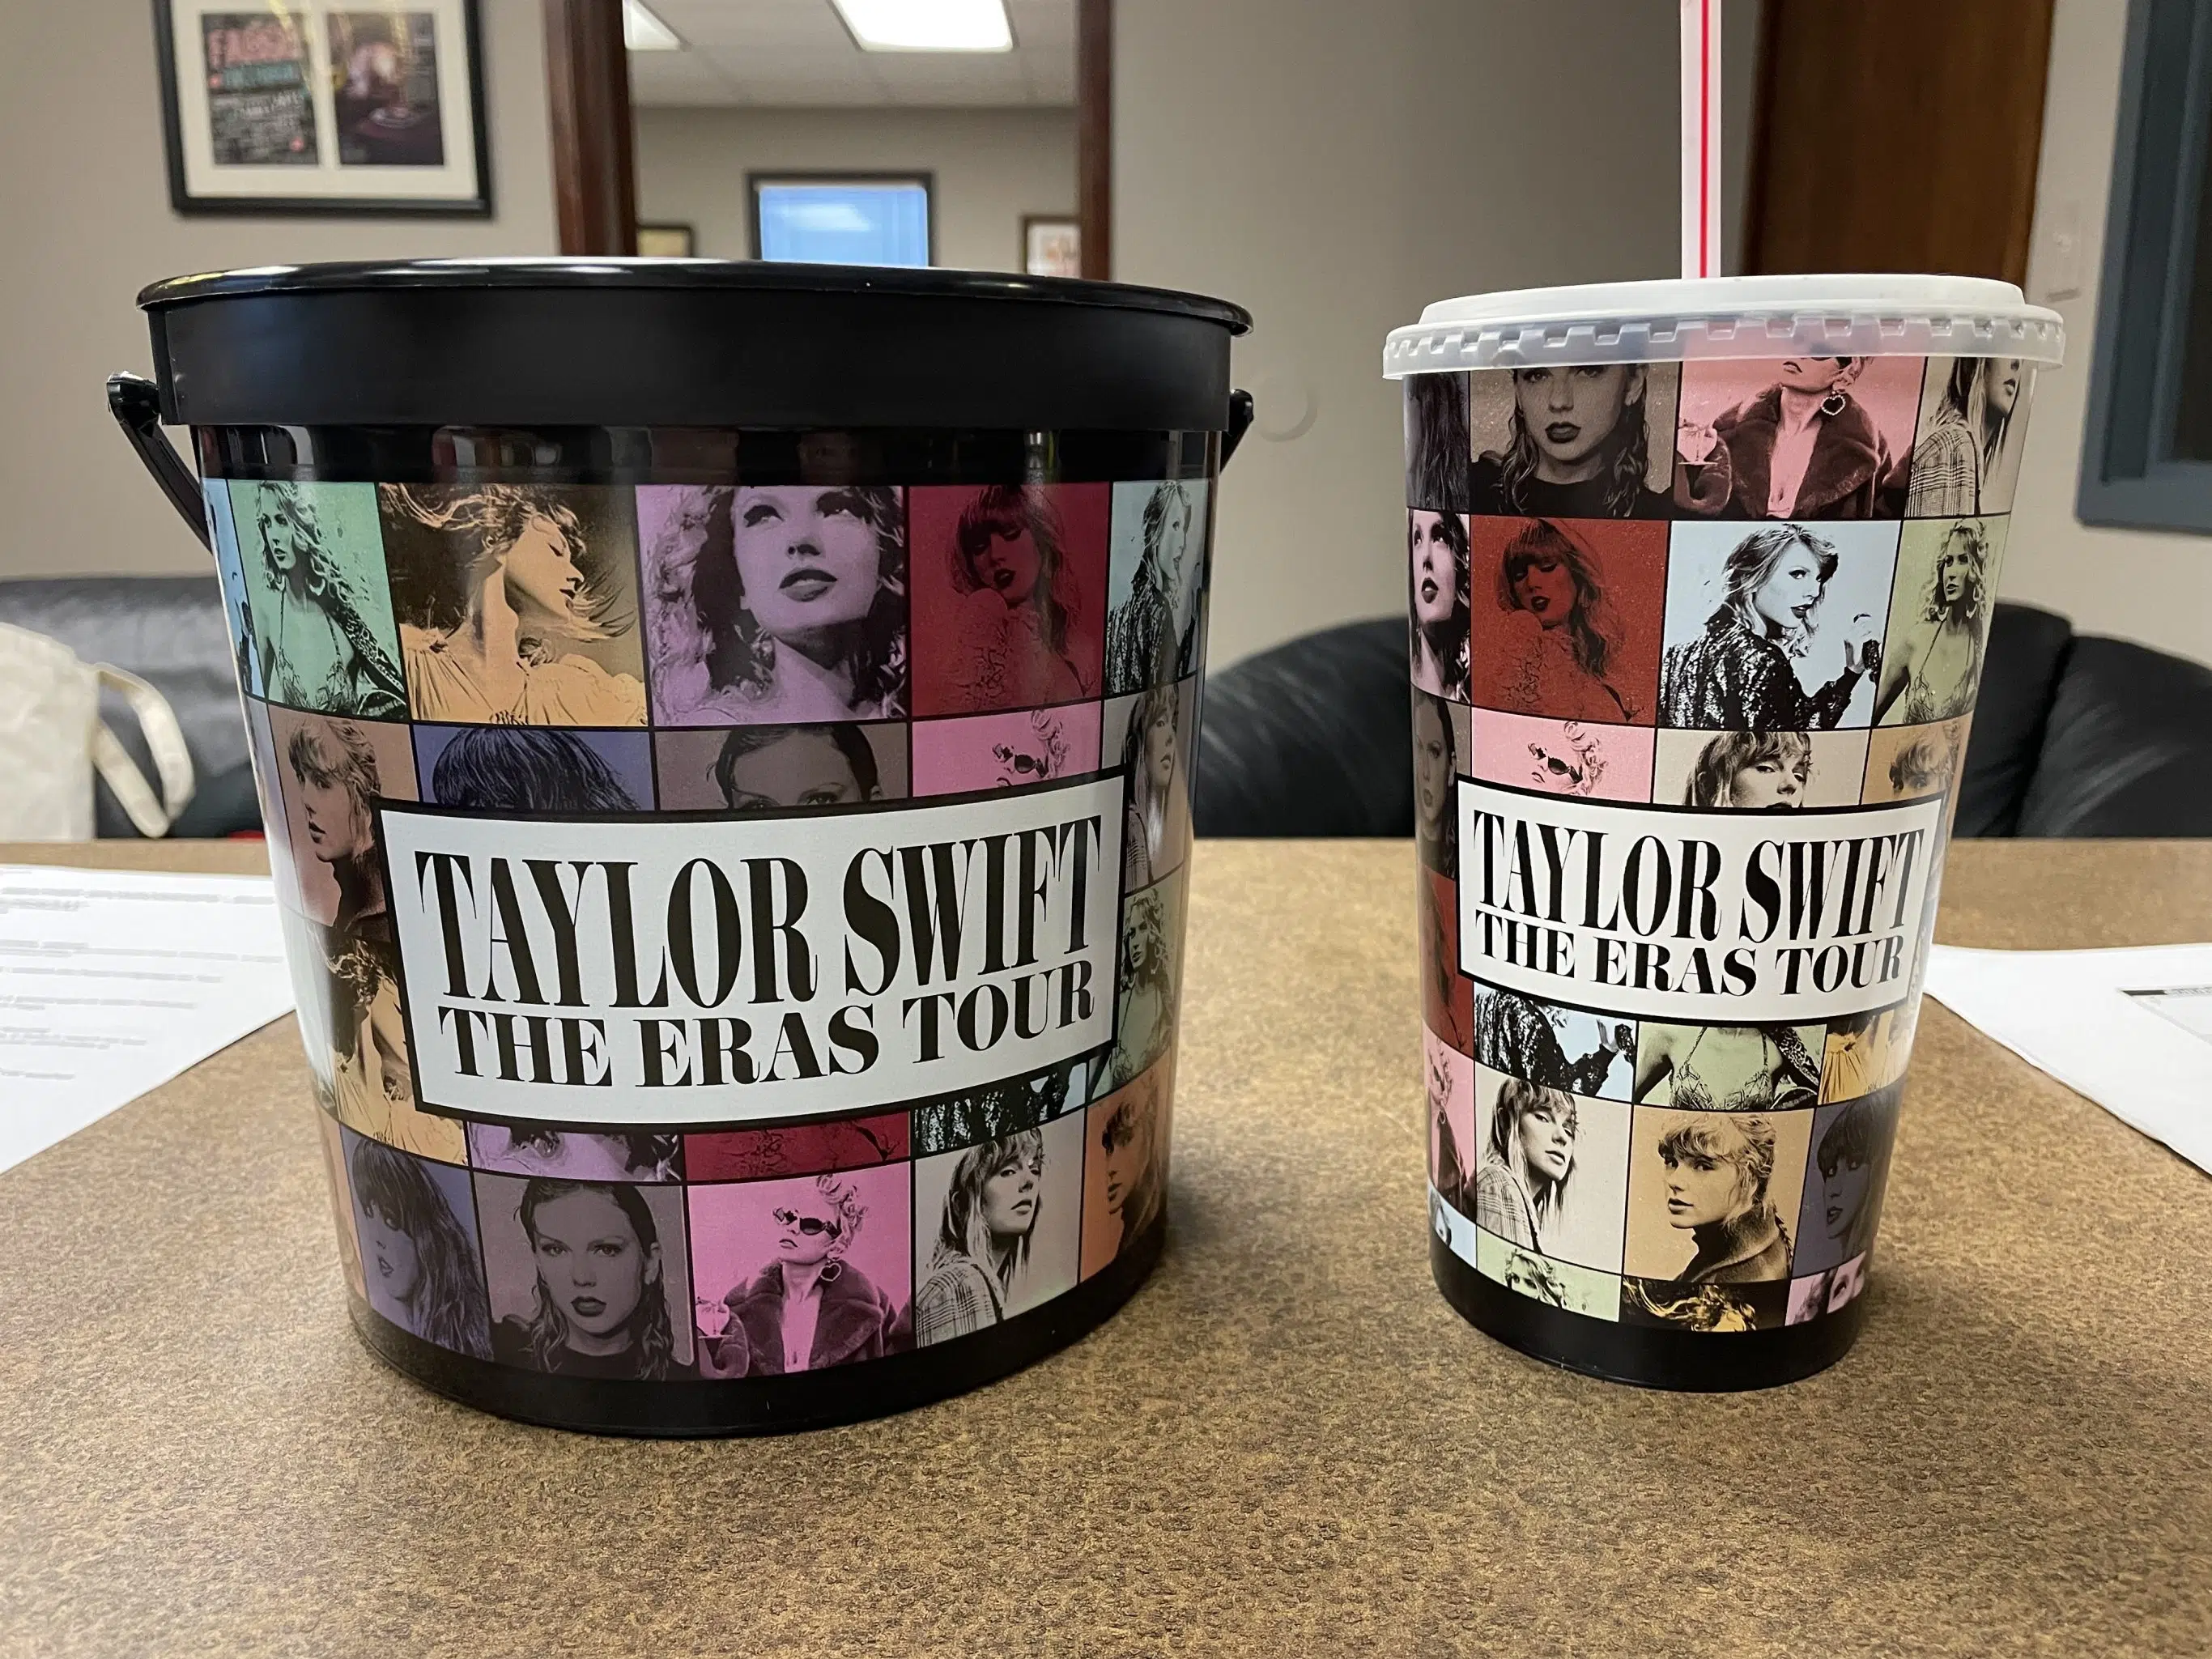 Managed to pick up the Taylor Swift Premium collectable cup and